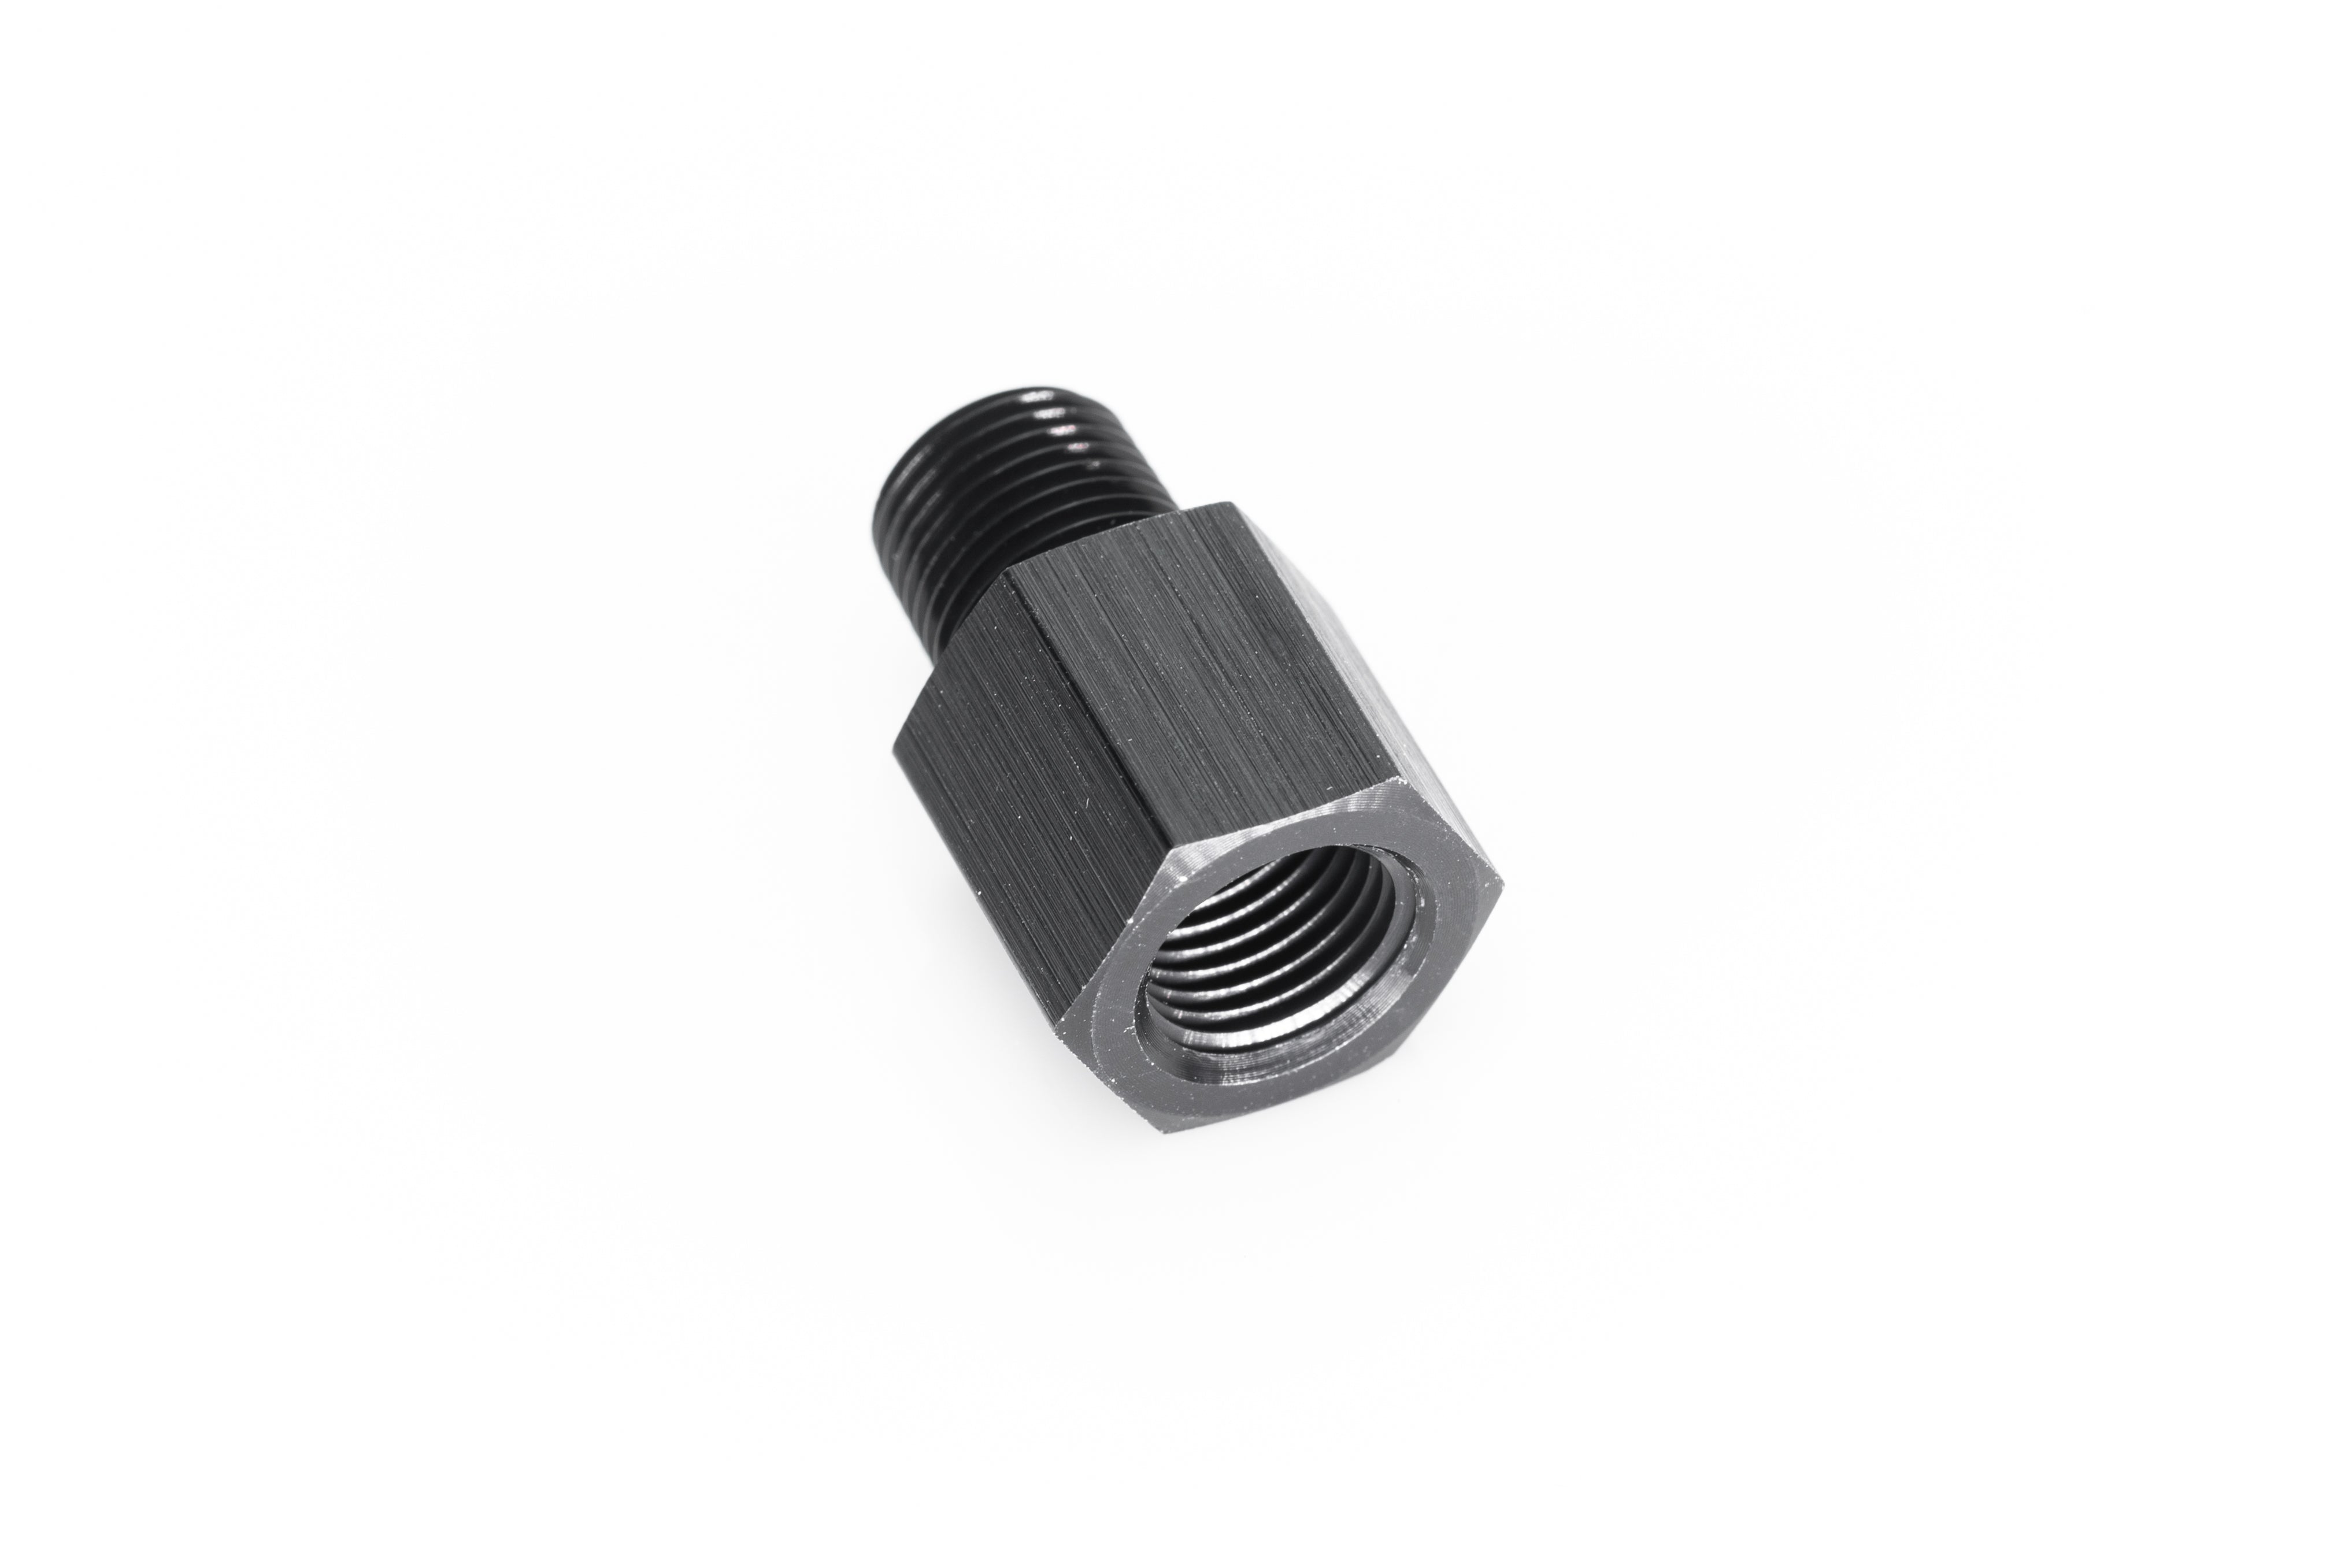 1/8BSP MALE to 1/8NPT FEMALE ADAPTER - (11908610)